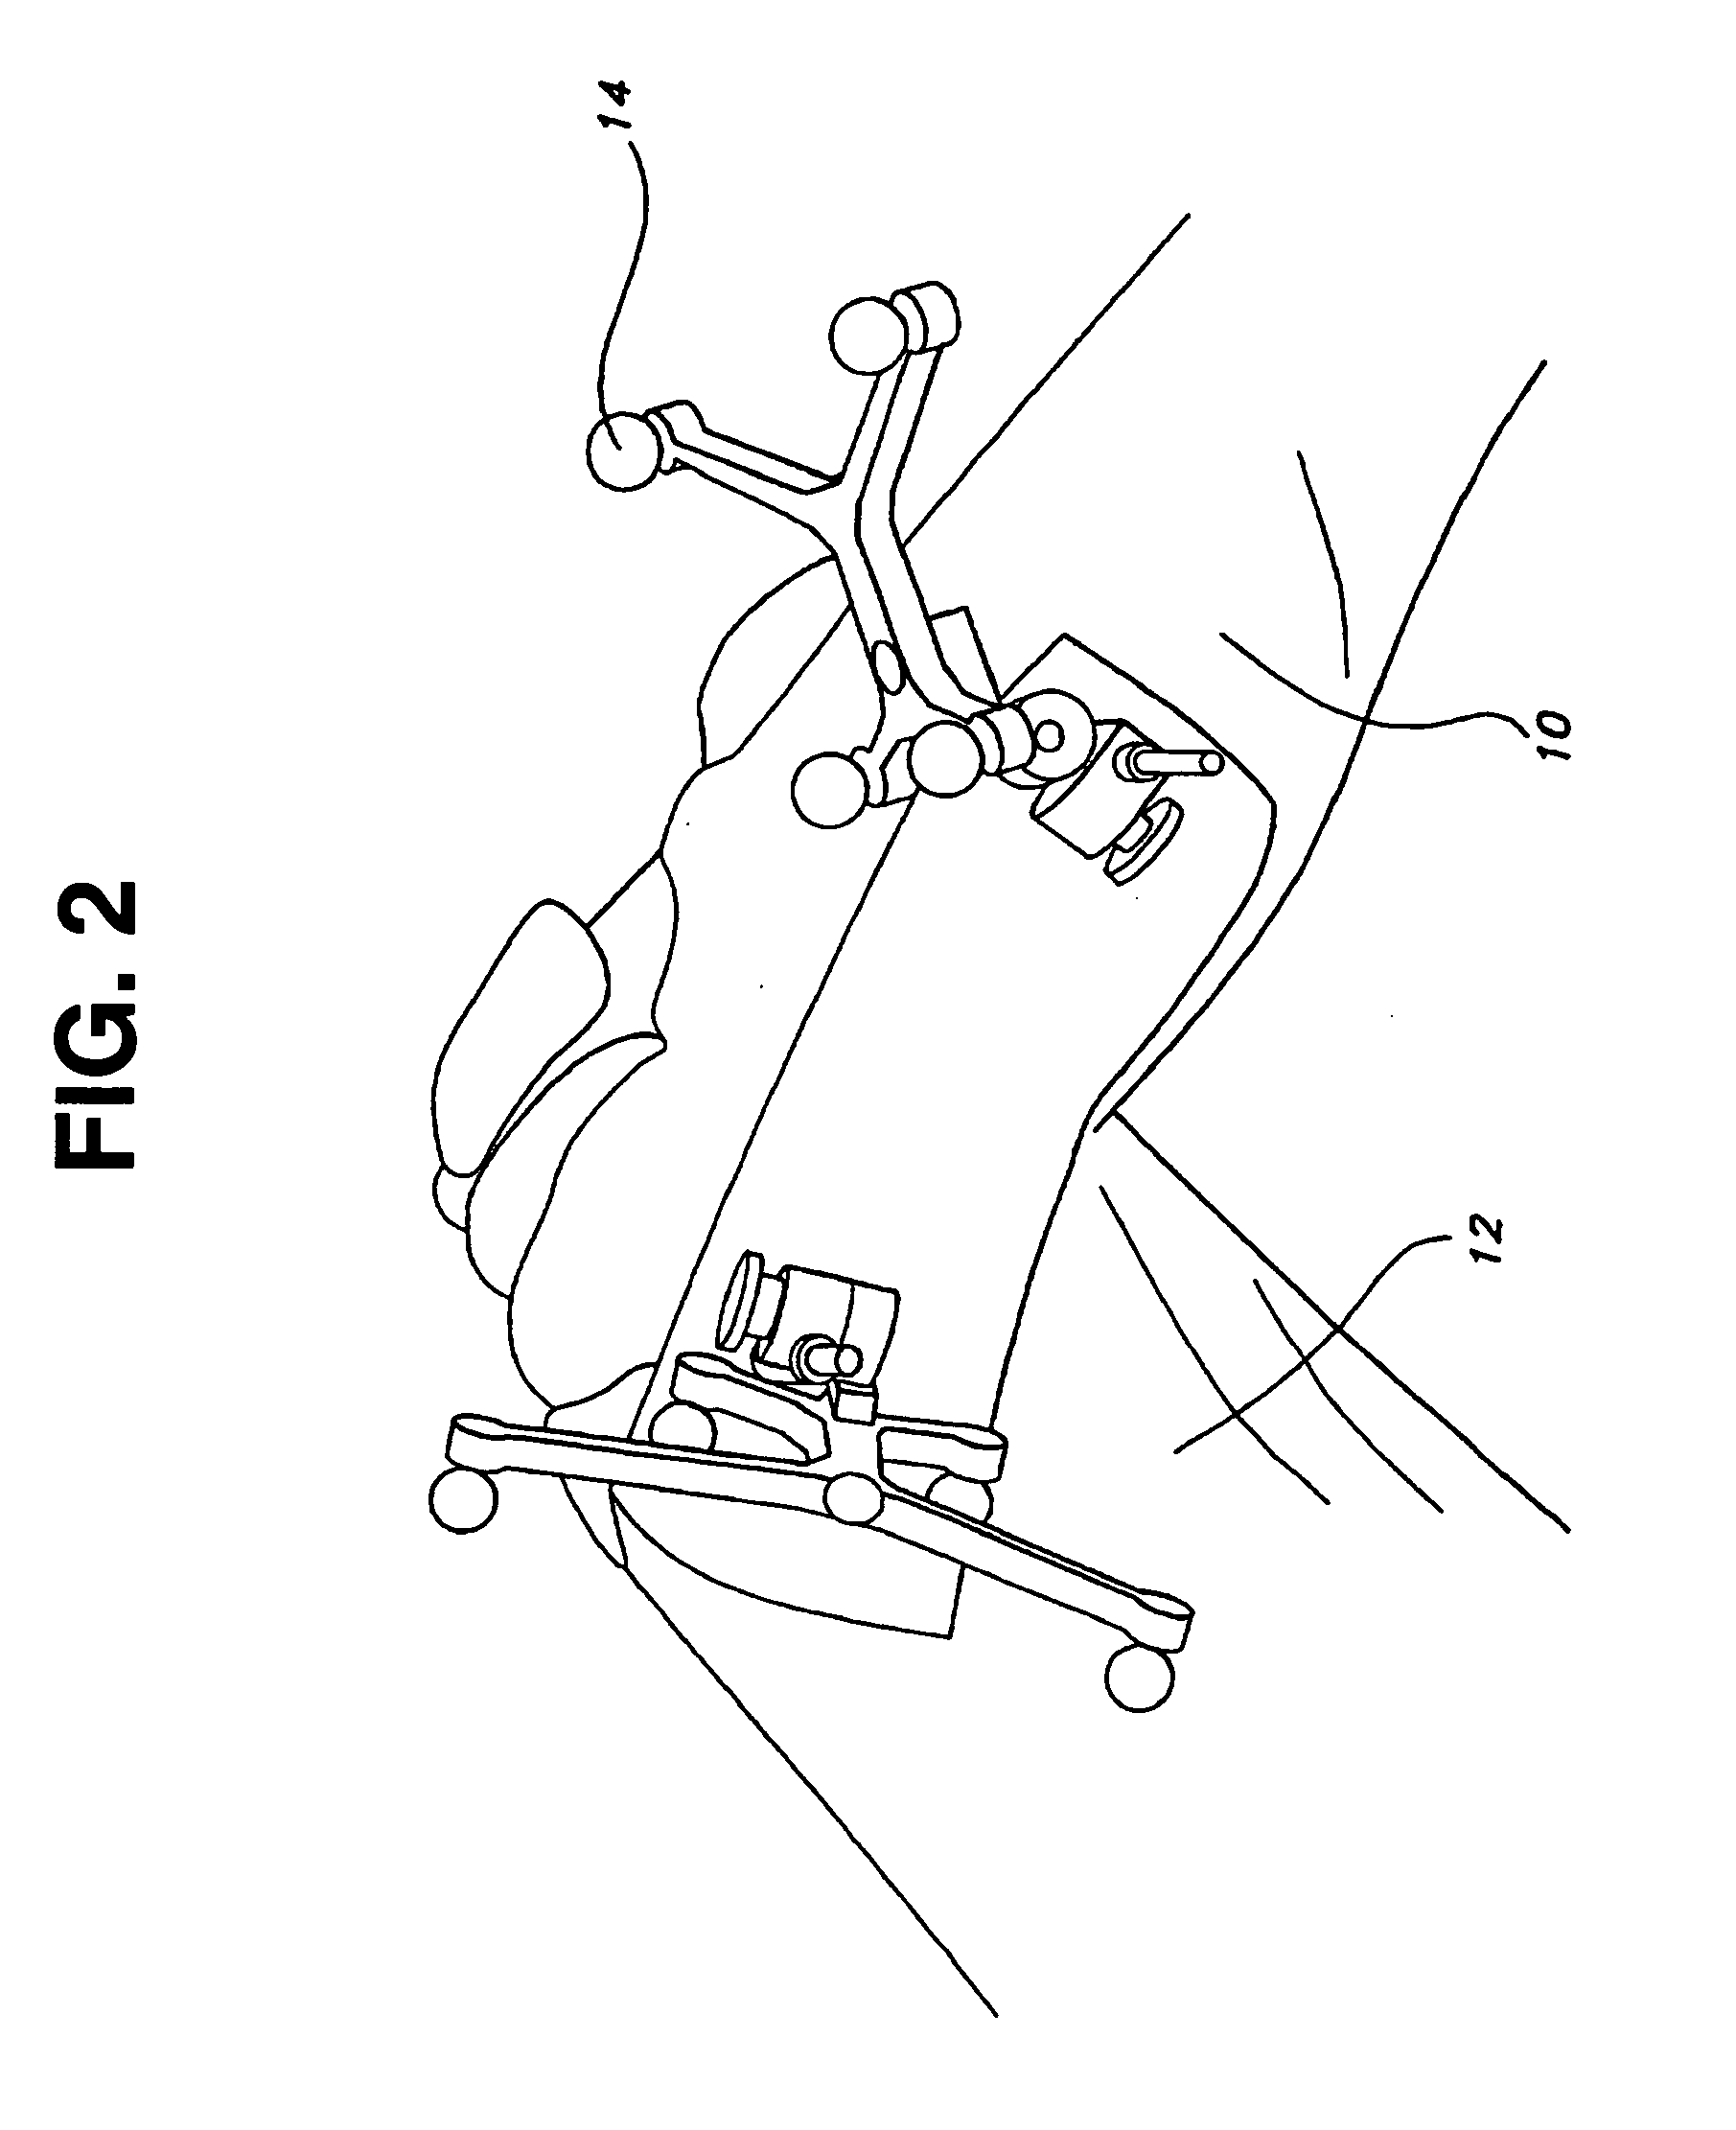 System and method for modular navigated osteotome